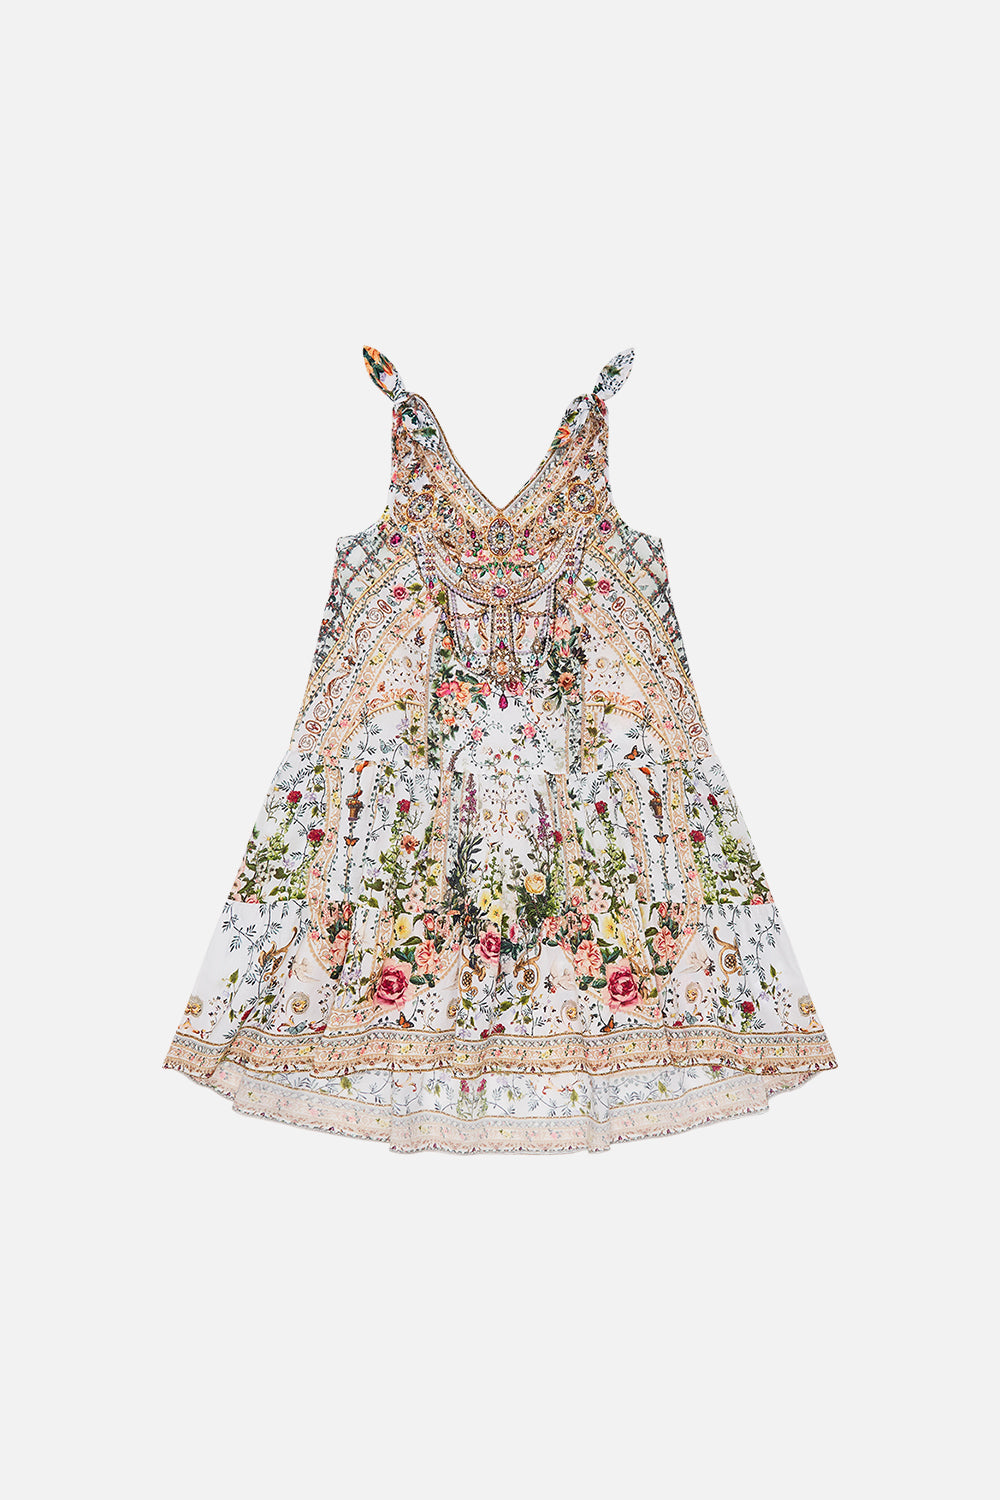 Product view of Milla by CAMILLA kids floral dress with bow in Reniassance Romance print 